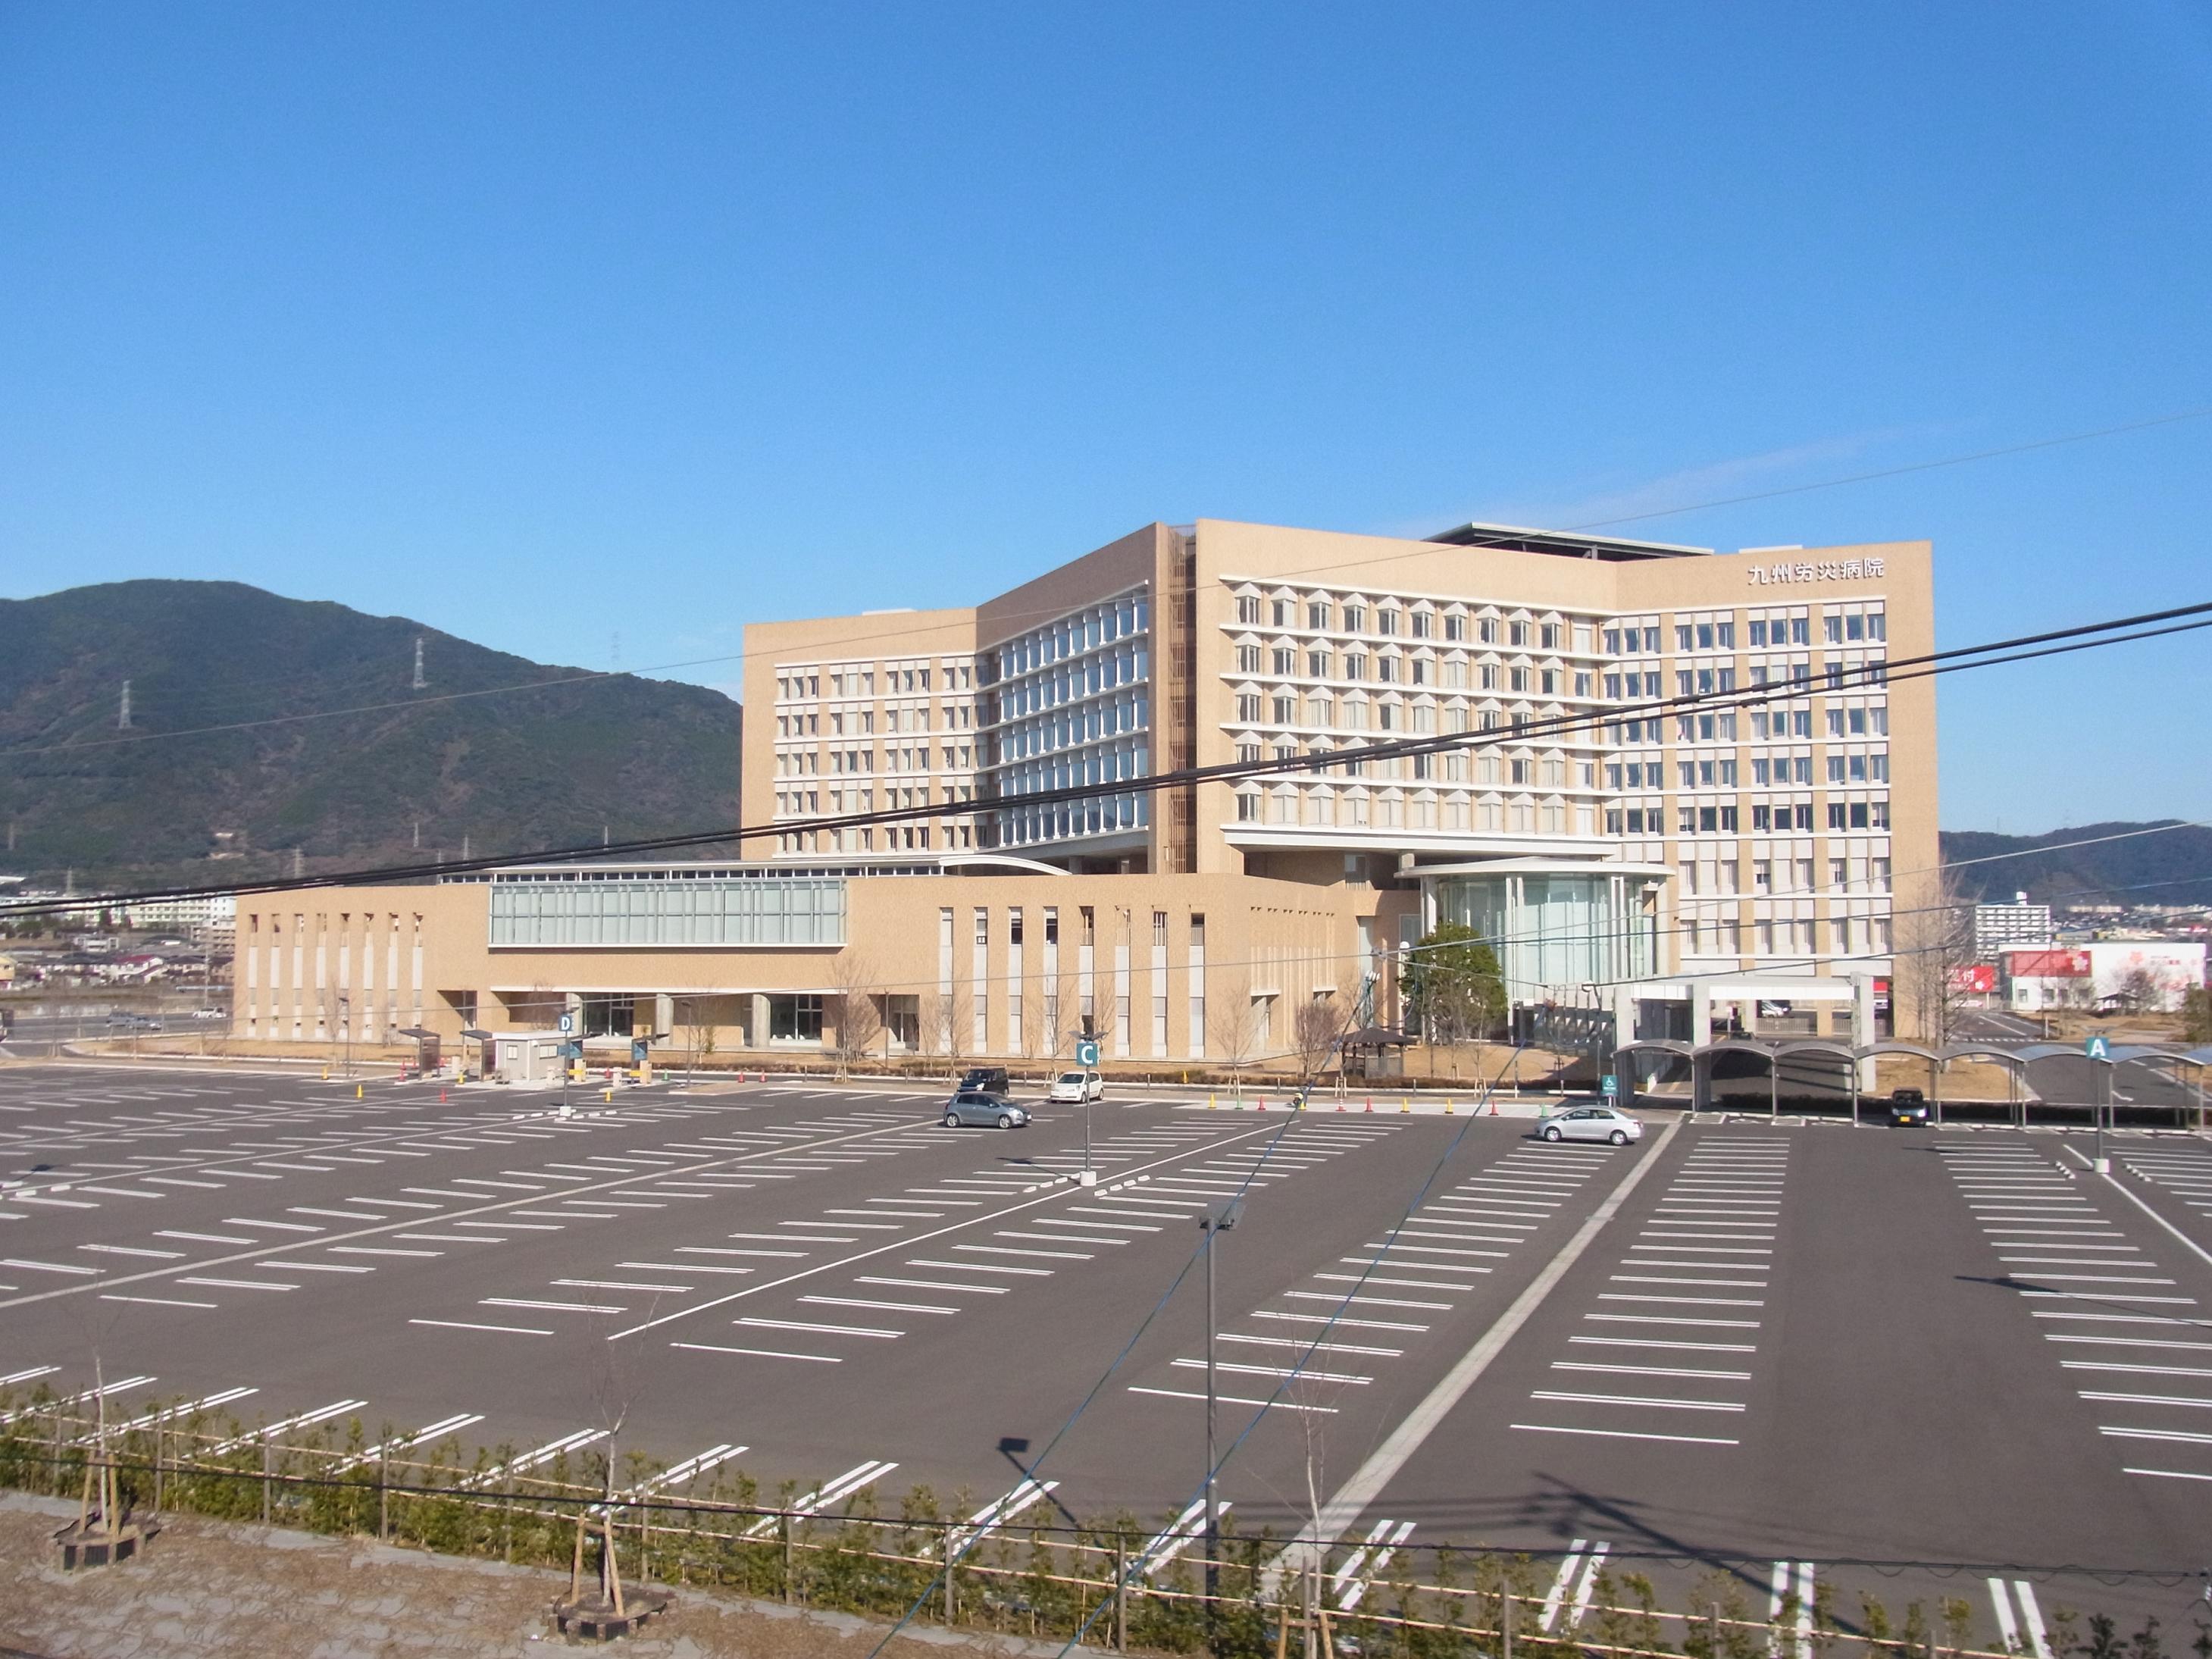 Hospital. 825m to the National Institute of Labor Health and Welfare Organization Kyushurosaibyoin (hospital)